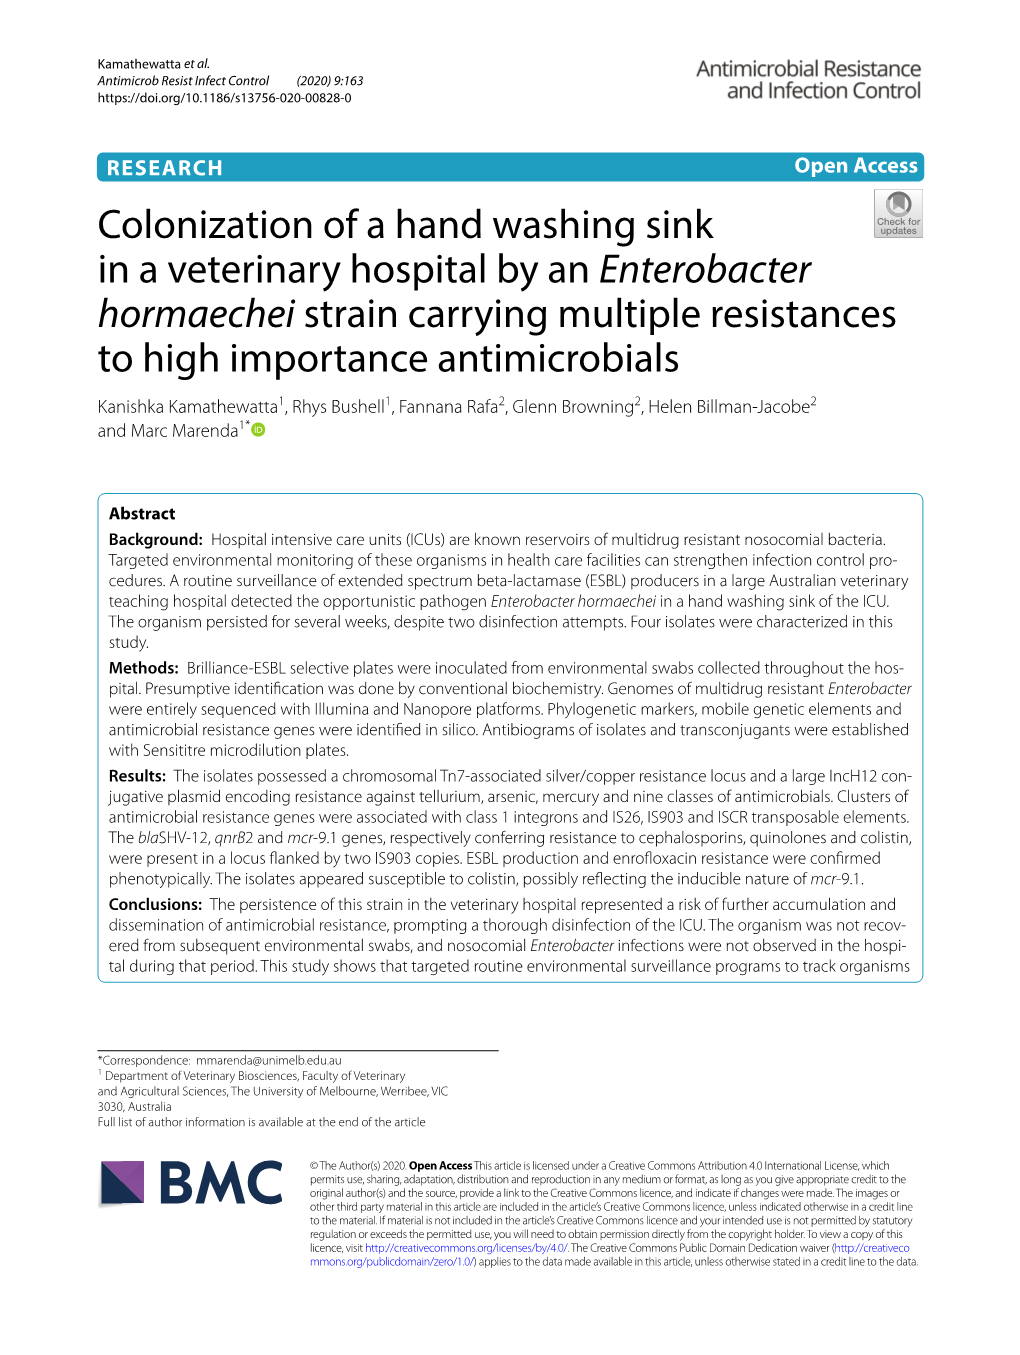 Colonization of a Hand Washing Sink in a Veterinary Hospital by An